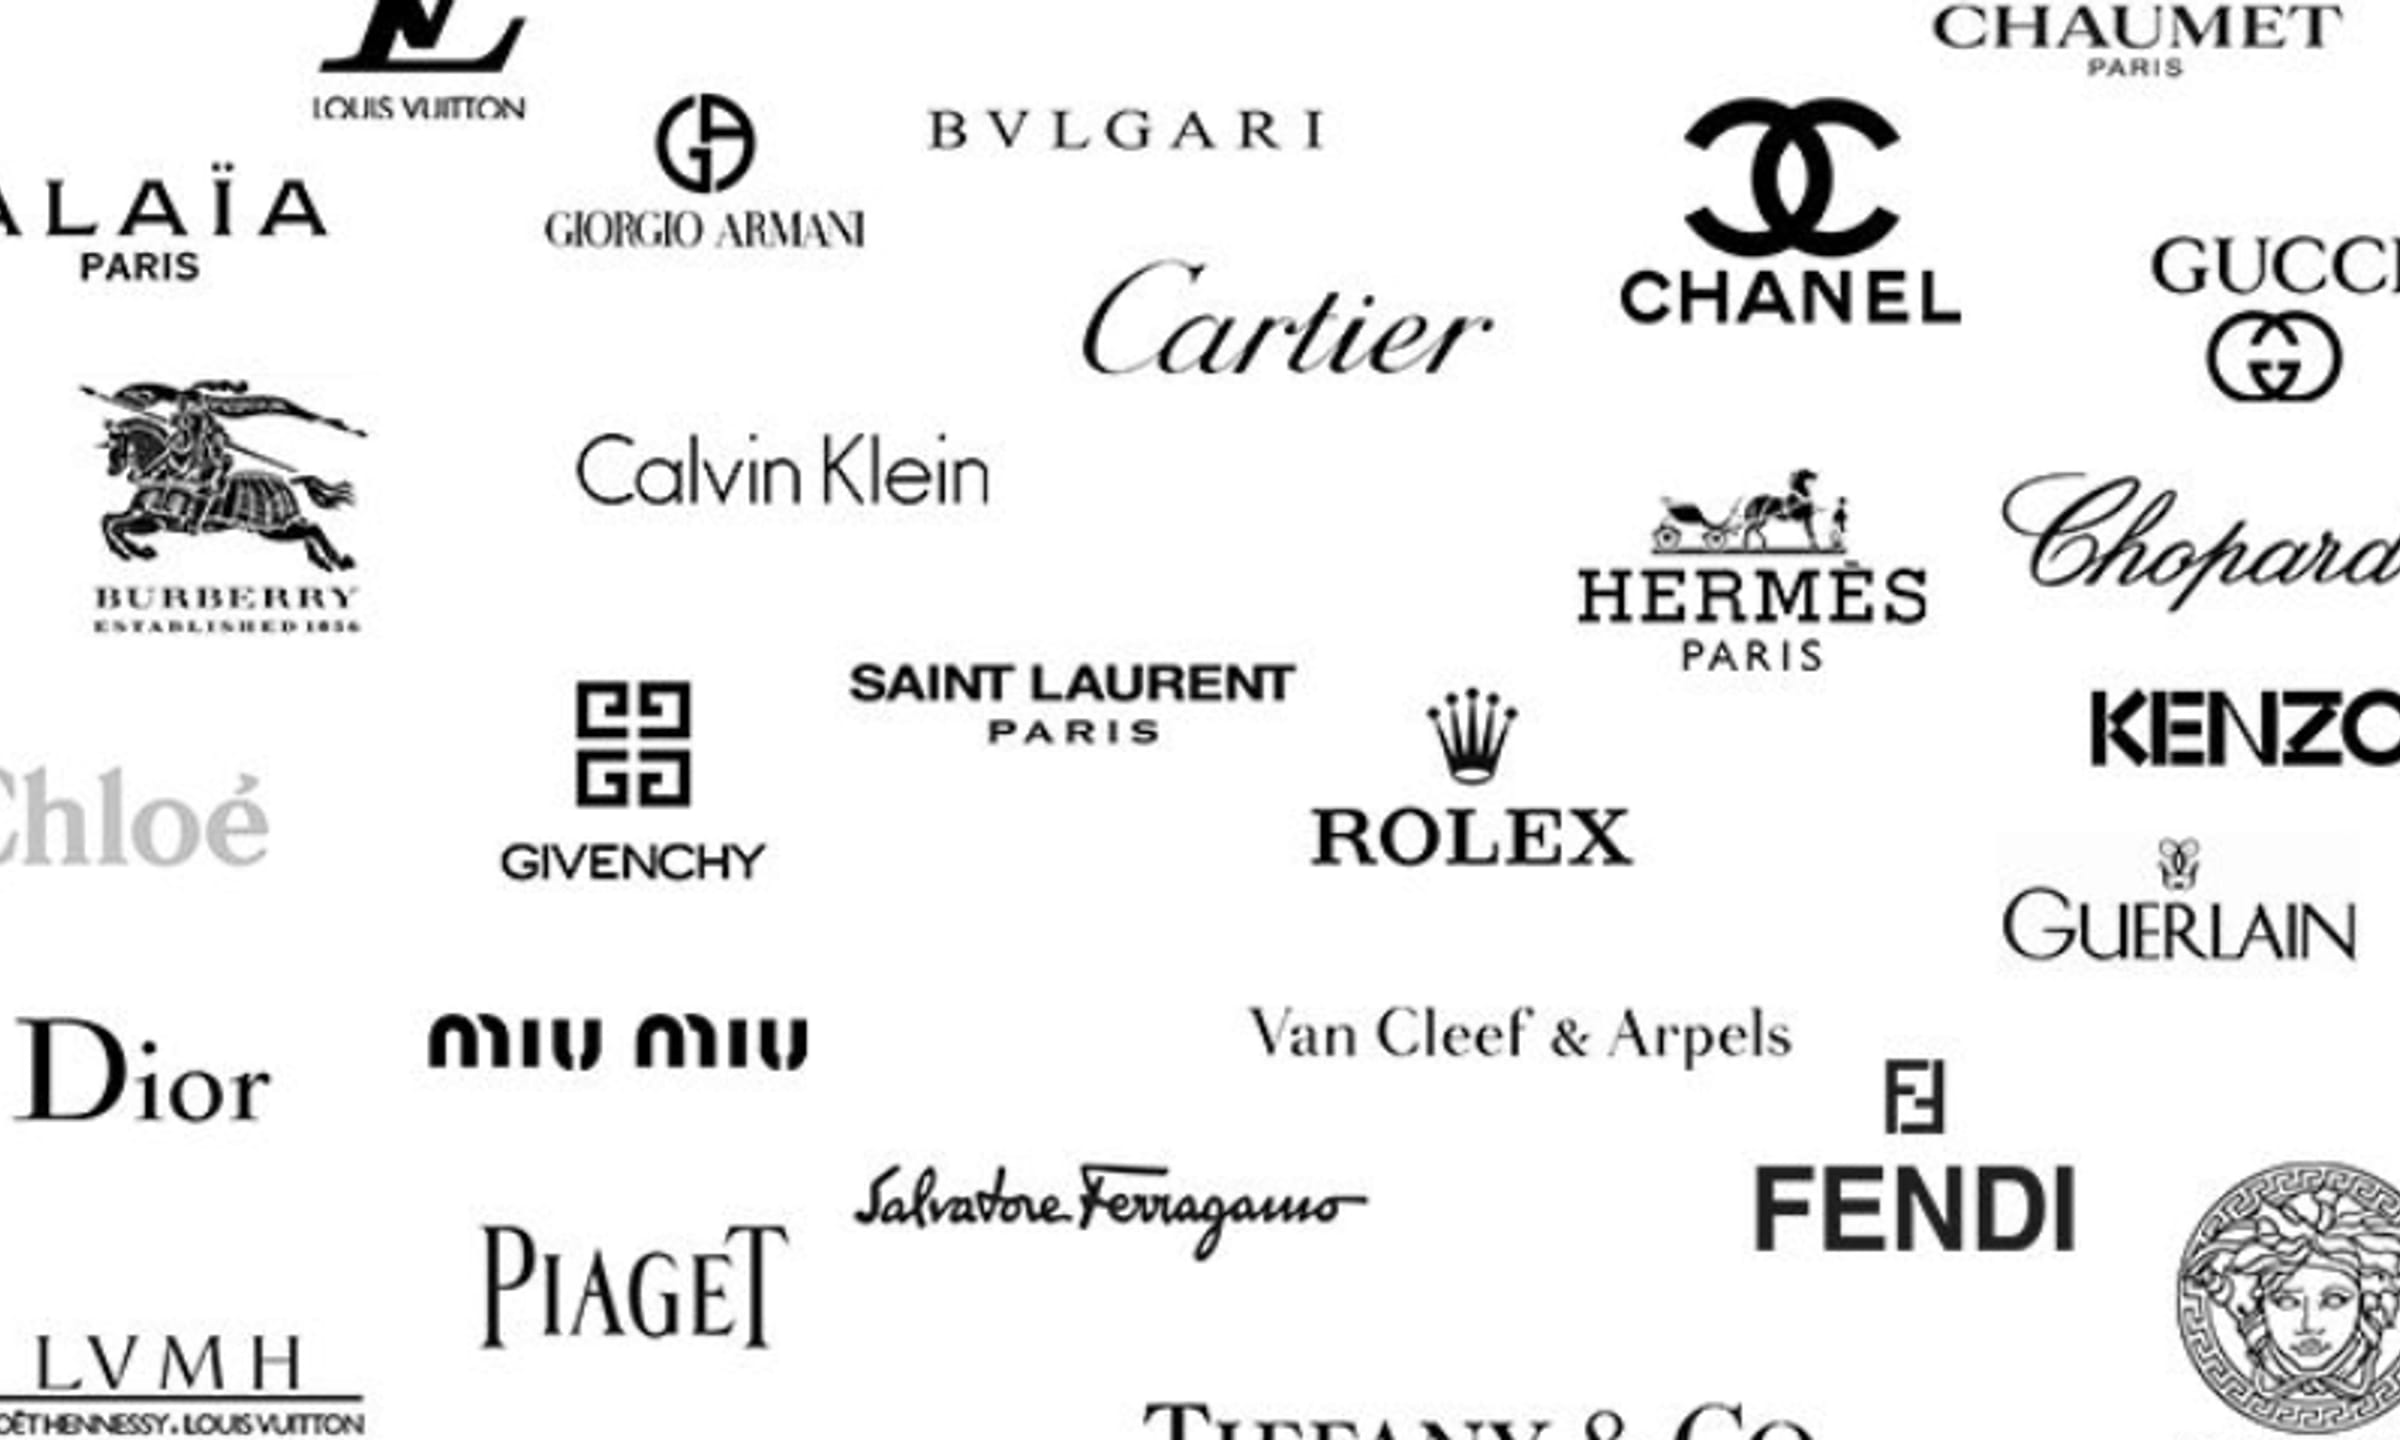 Top 5 leading luxury fashion brands of 2023